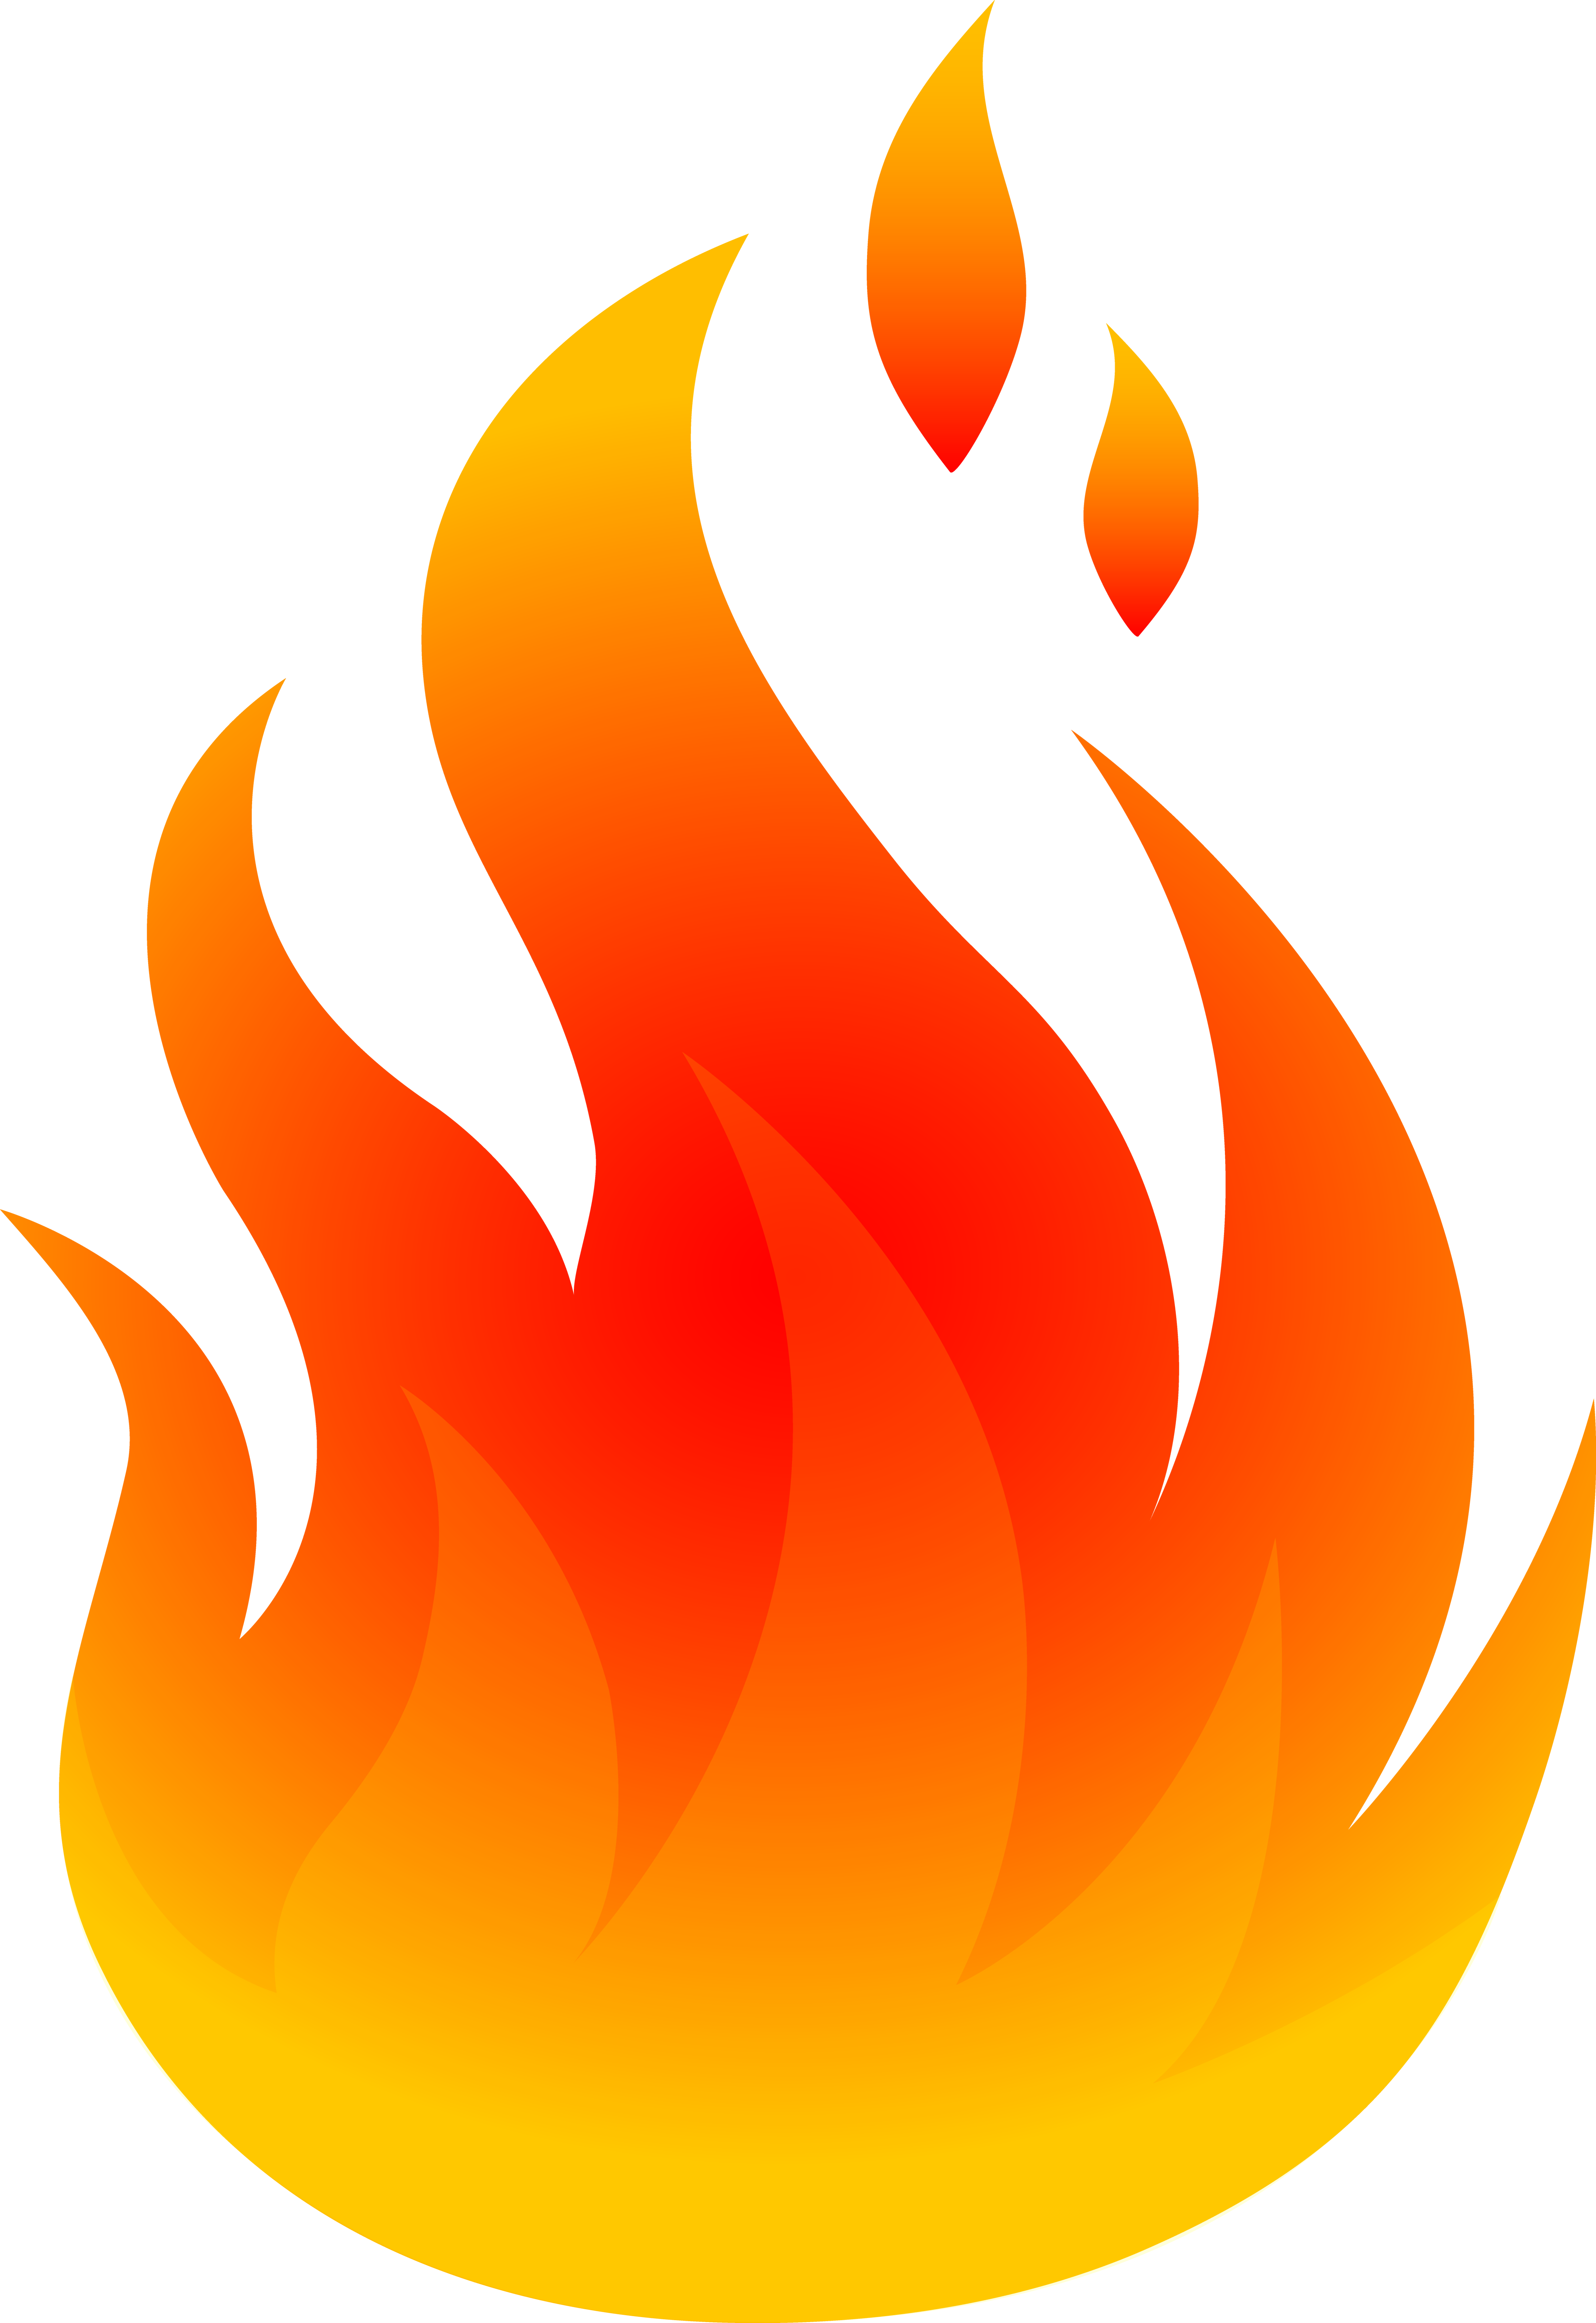 Free Realistic Flame Cliparts, Download Free Clip Art, Free.